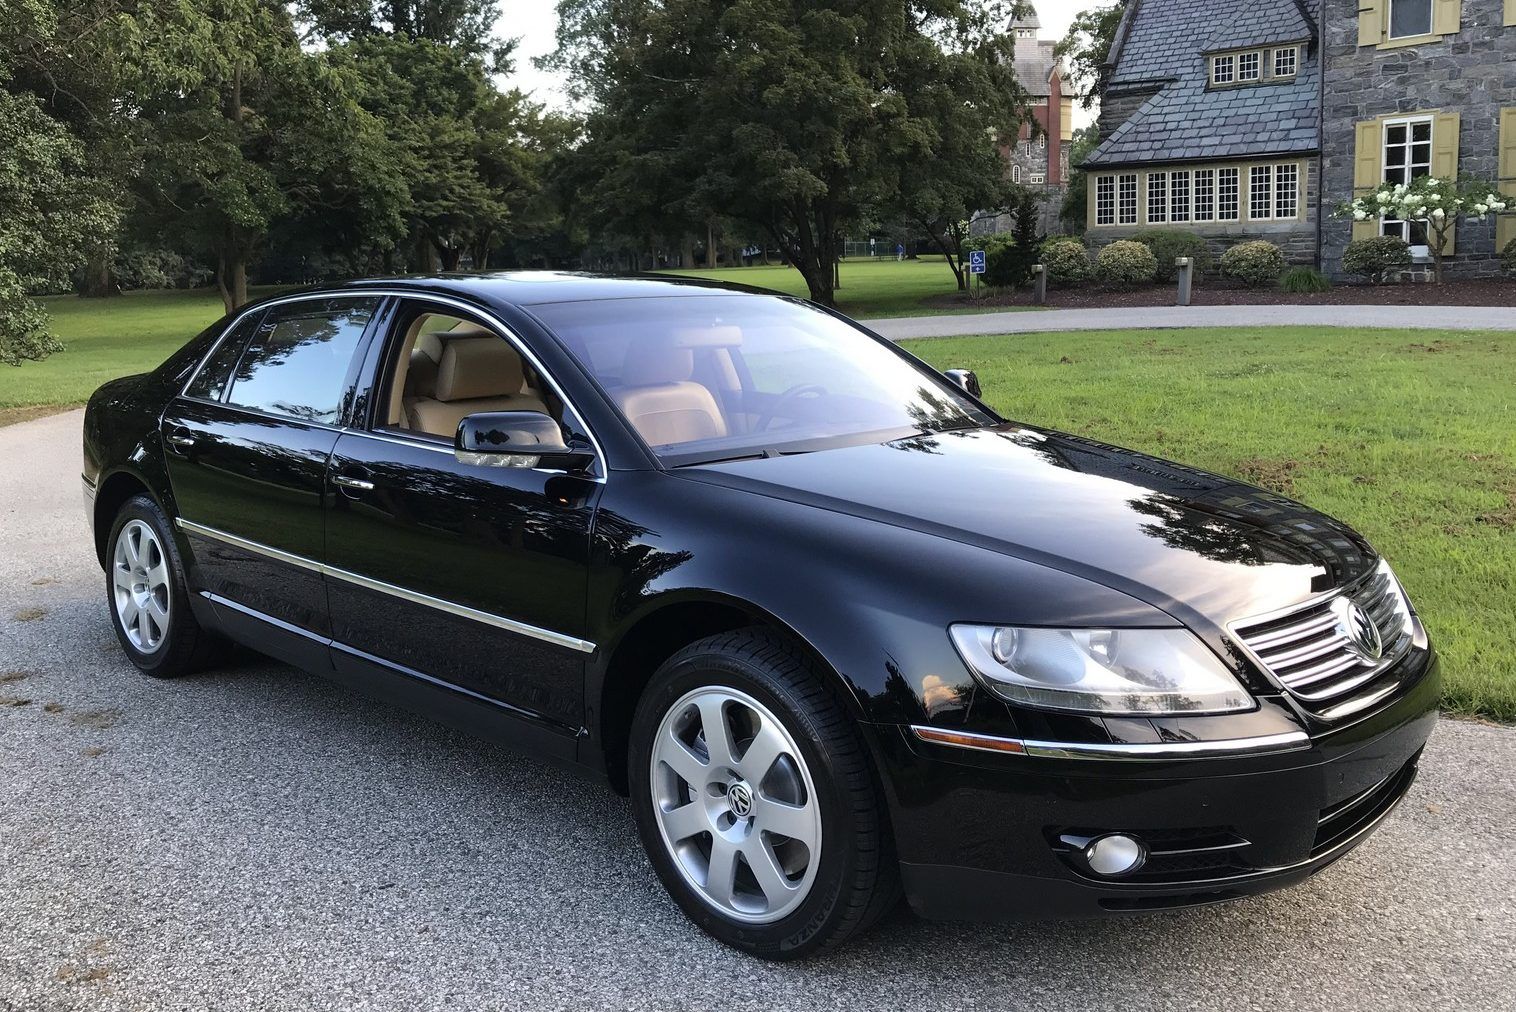 2004 Volkswagen Phaeton is a V12 from the people that brought you the Beetle